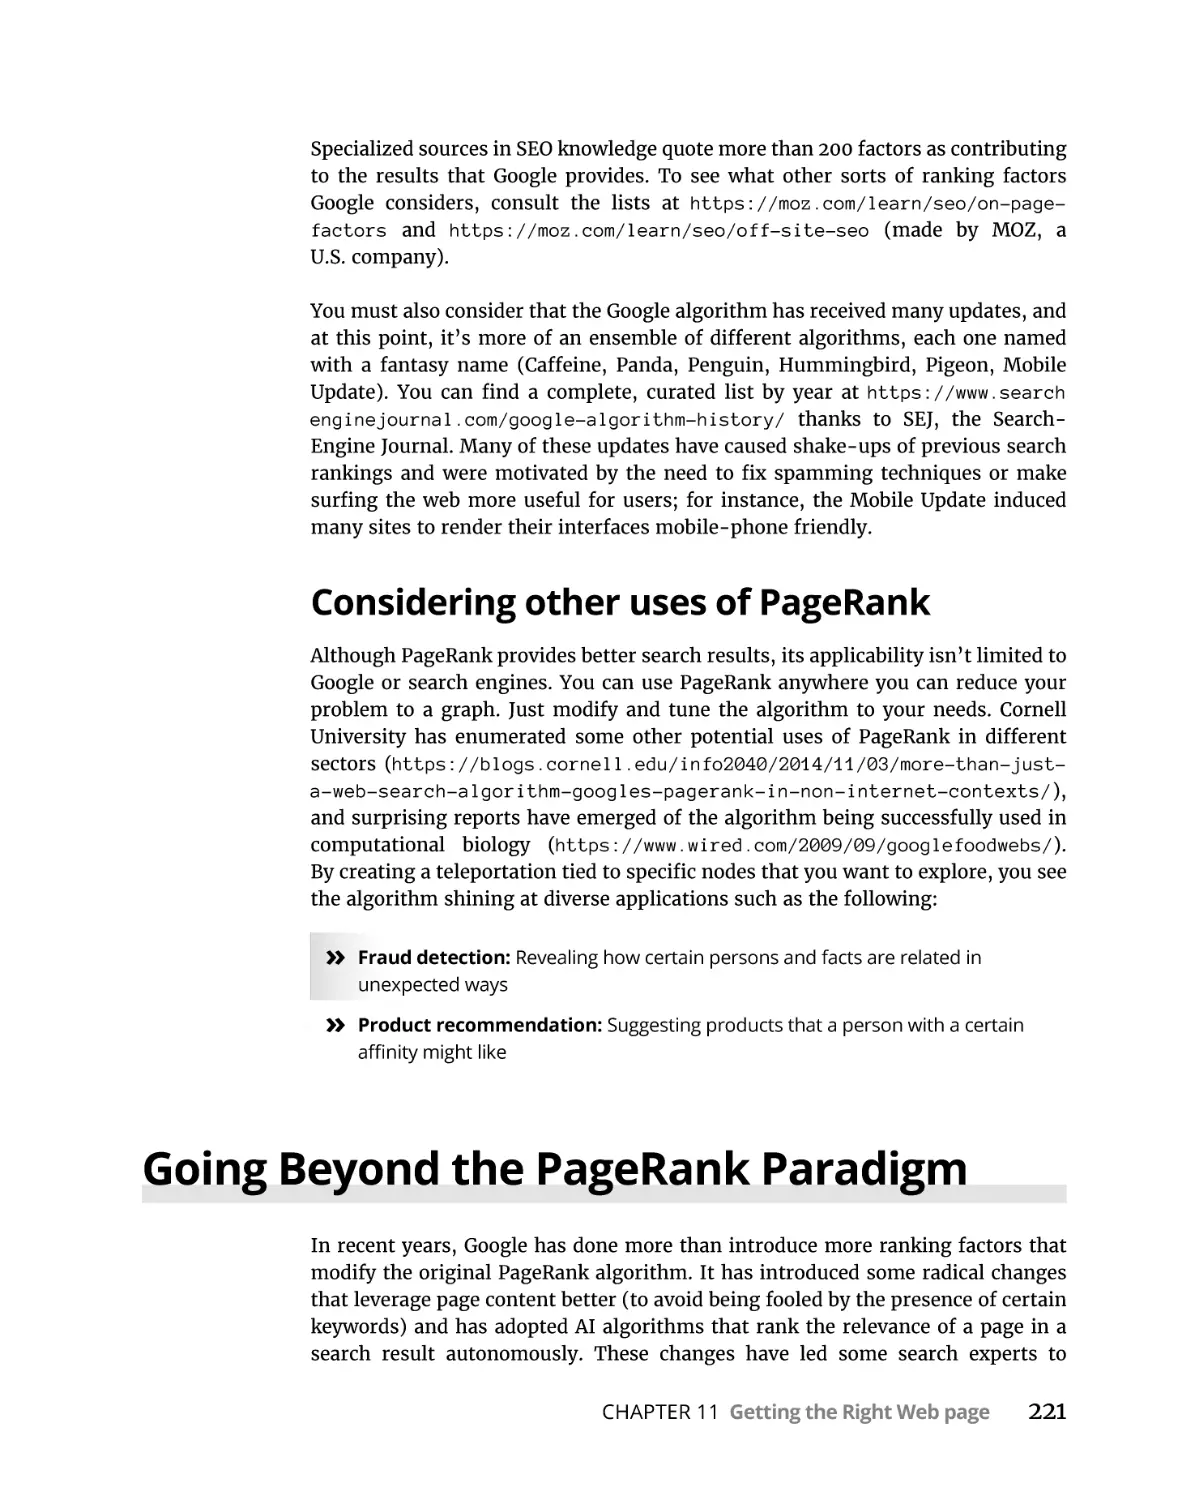 Considering other uses of PageRank
Going Beyond the PageRank Paradigm